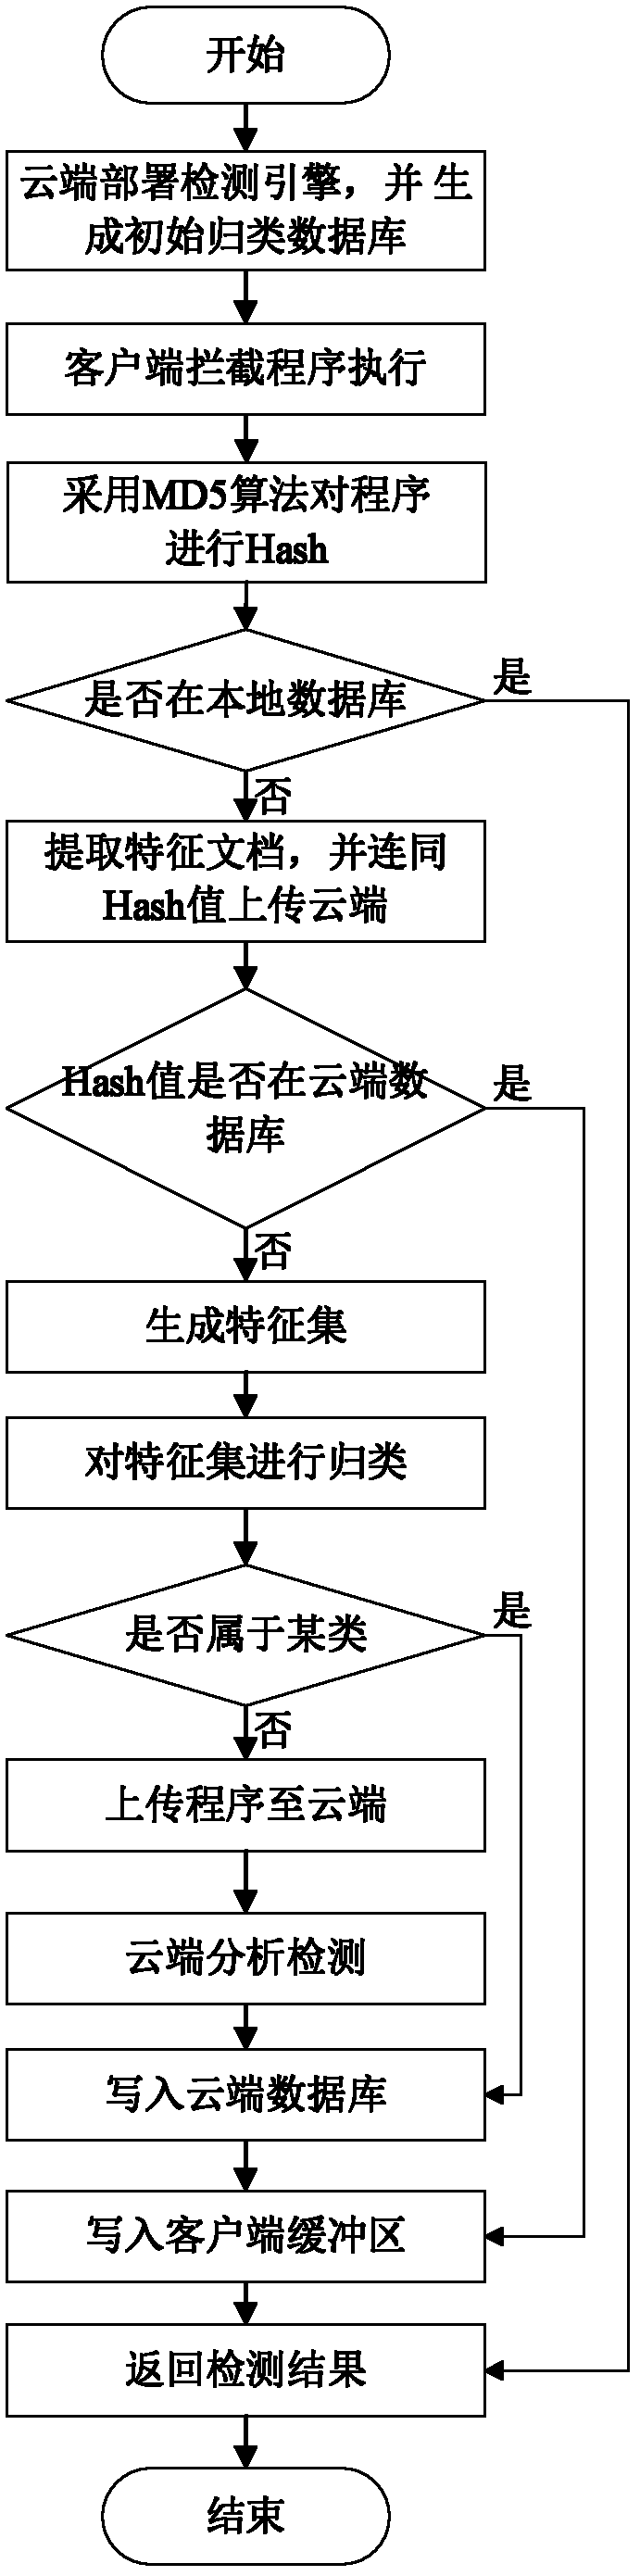 Malicious code type detection method based on cloud mode